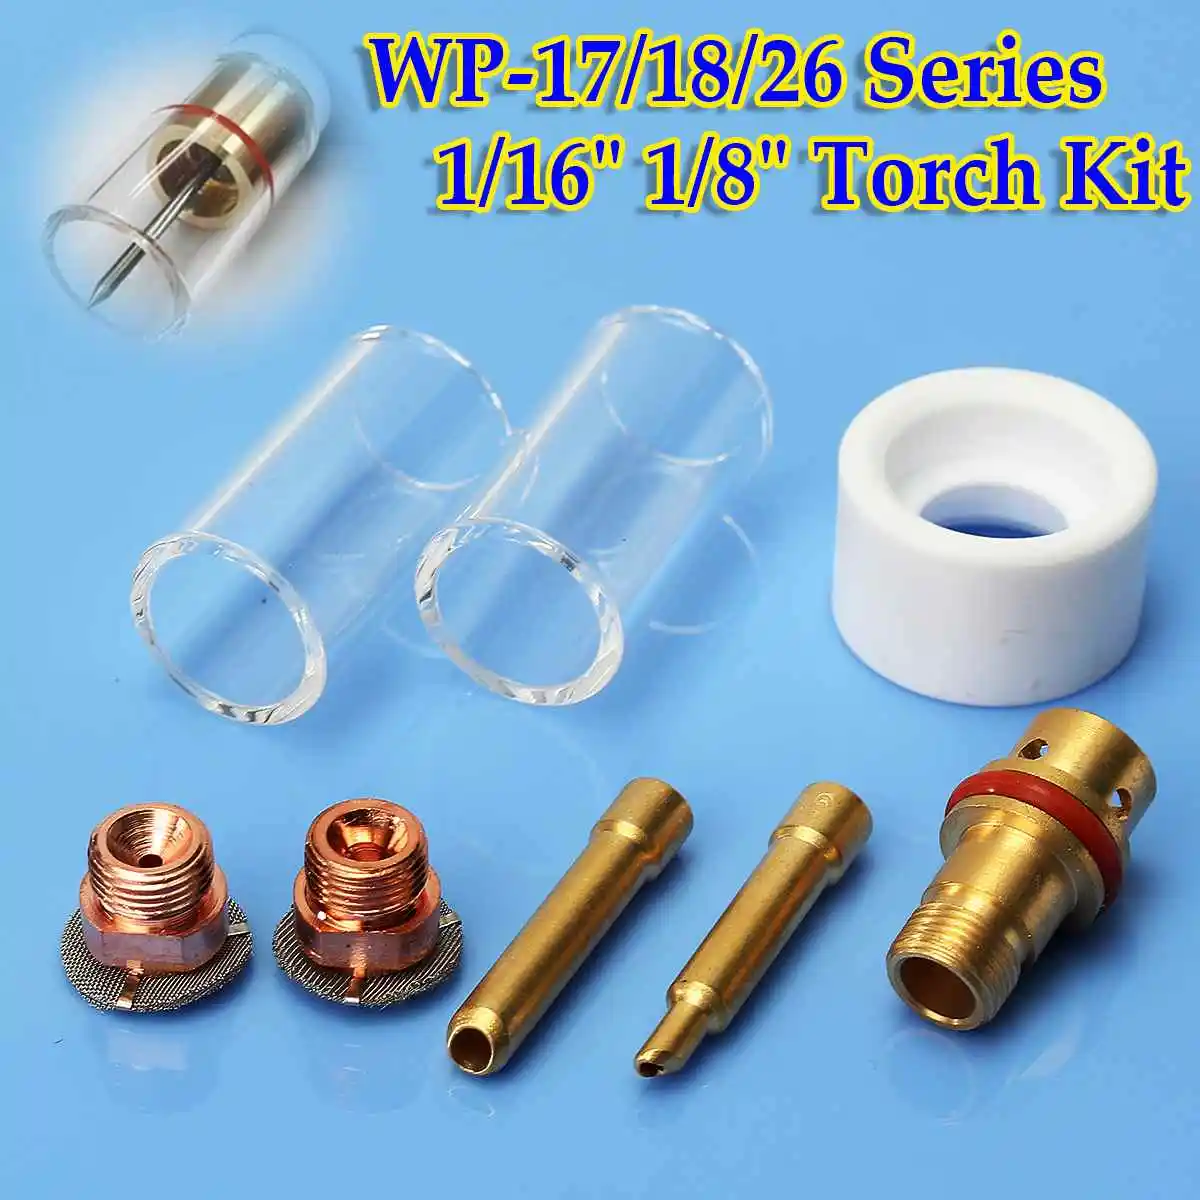 

8 Pcs/Set TIG Welding Torch Cup Gas Saver Stubby Cup Gas Collet Nozzle Kit For WP-17/18/26 1/16" 1/8" Series